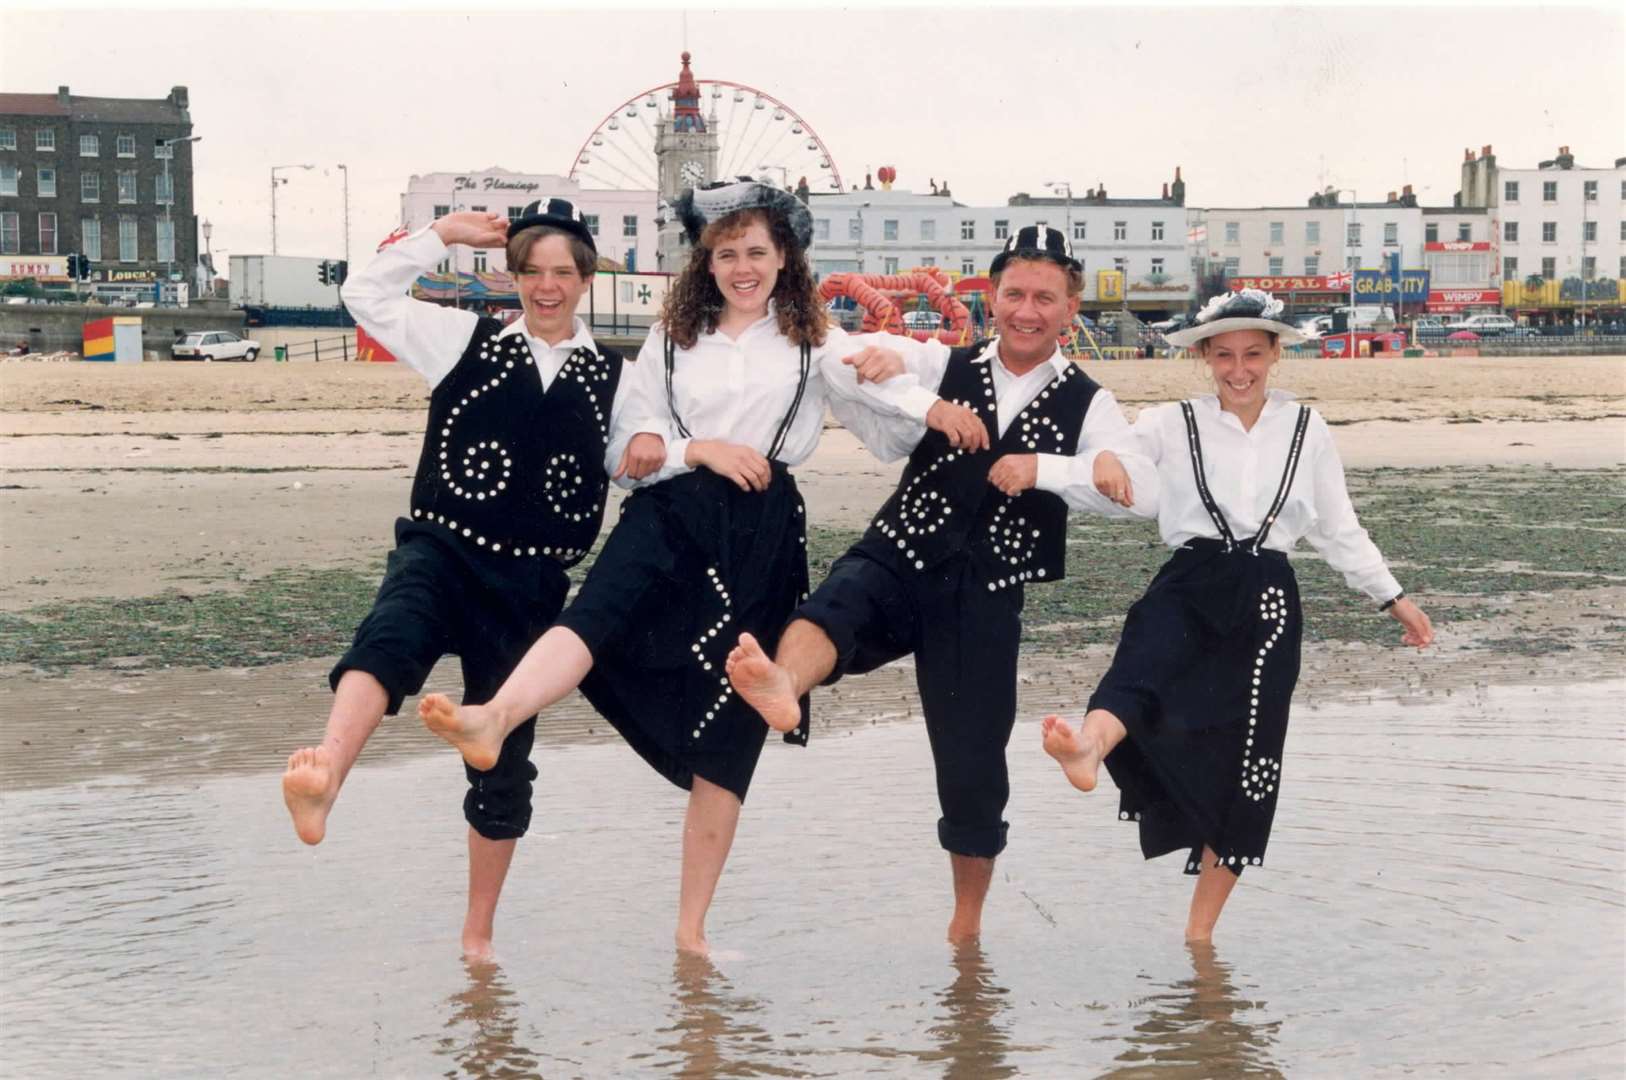 Having a knees-up at the Cockney Festival on Margate seafront in 1994